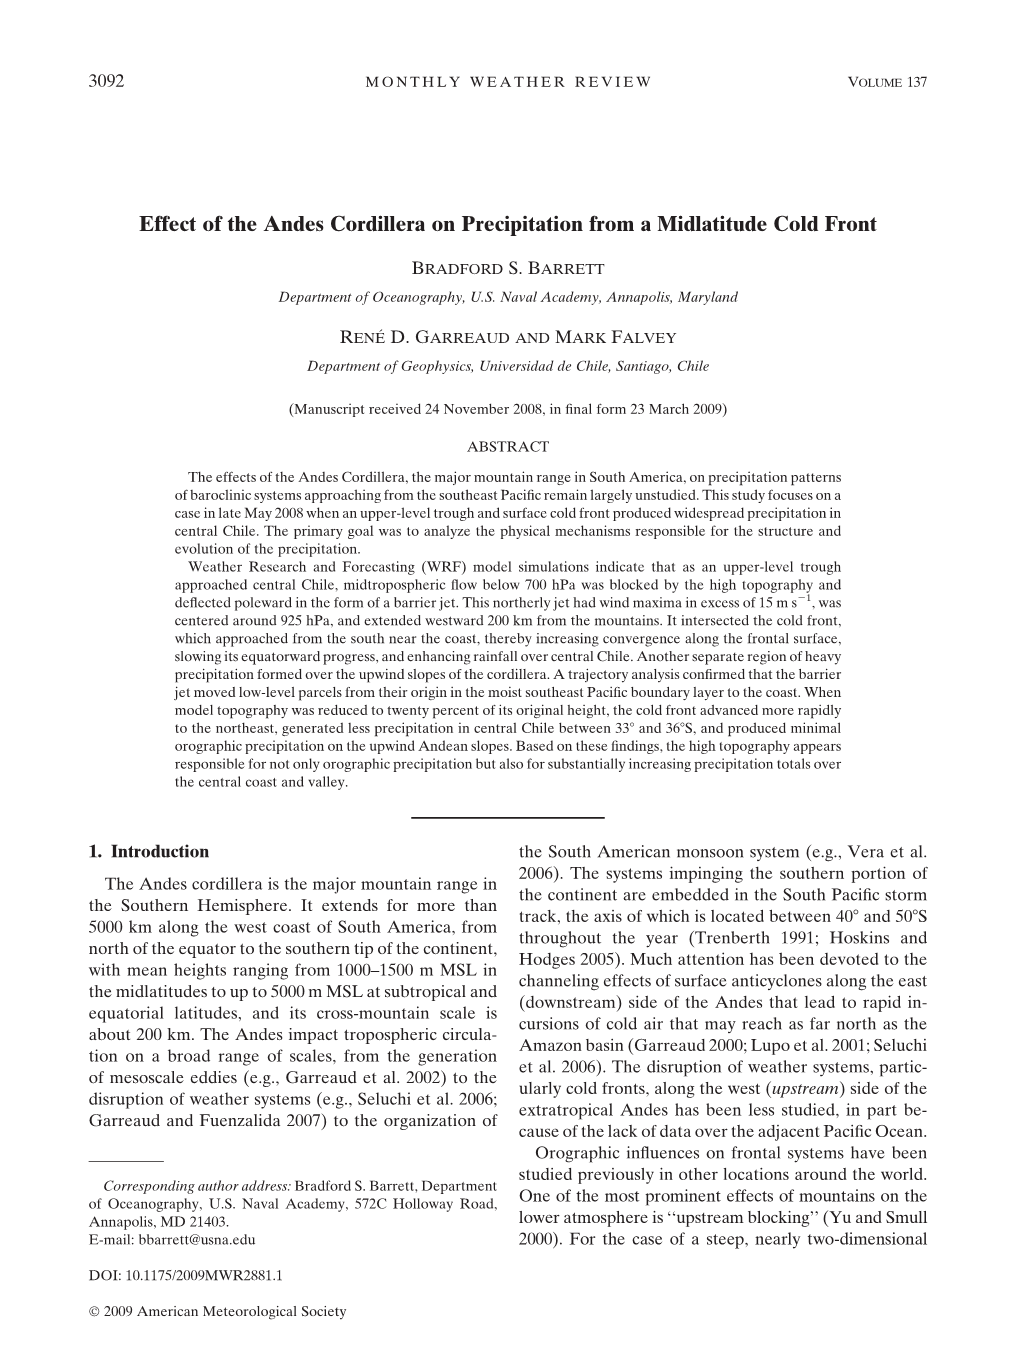 Effect of the Andes Cordillera on Precipitation from a Midlatitude Cold Front